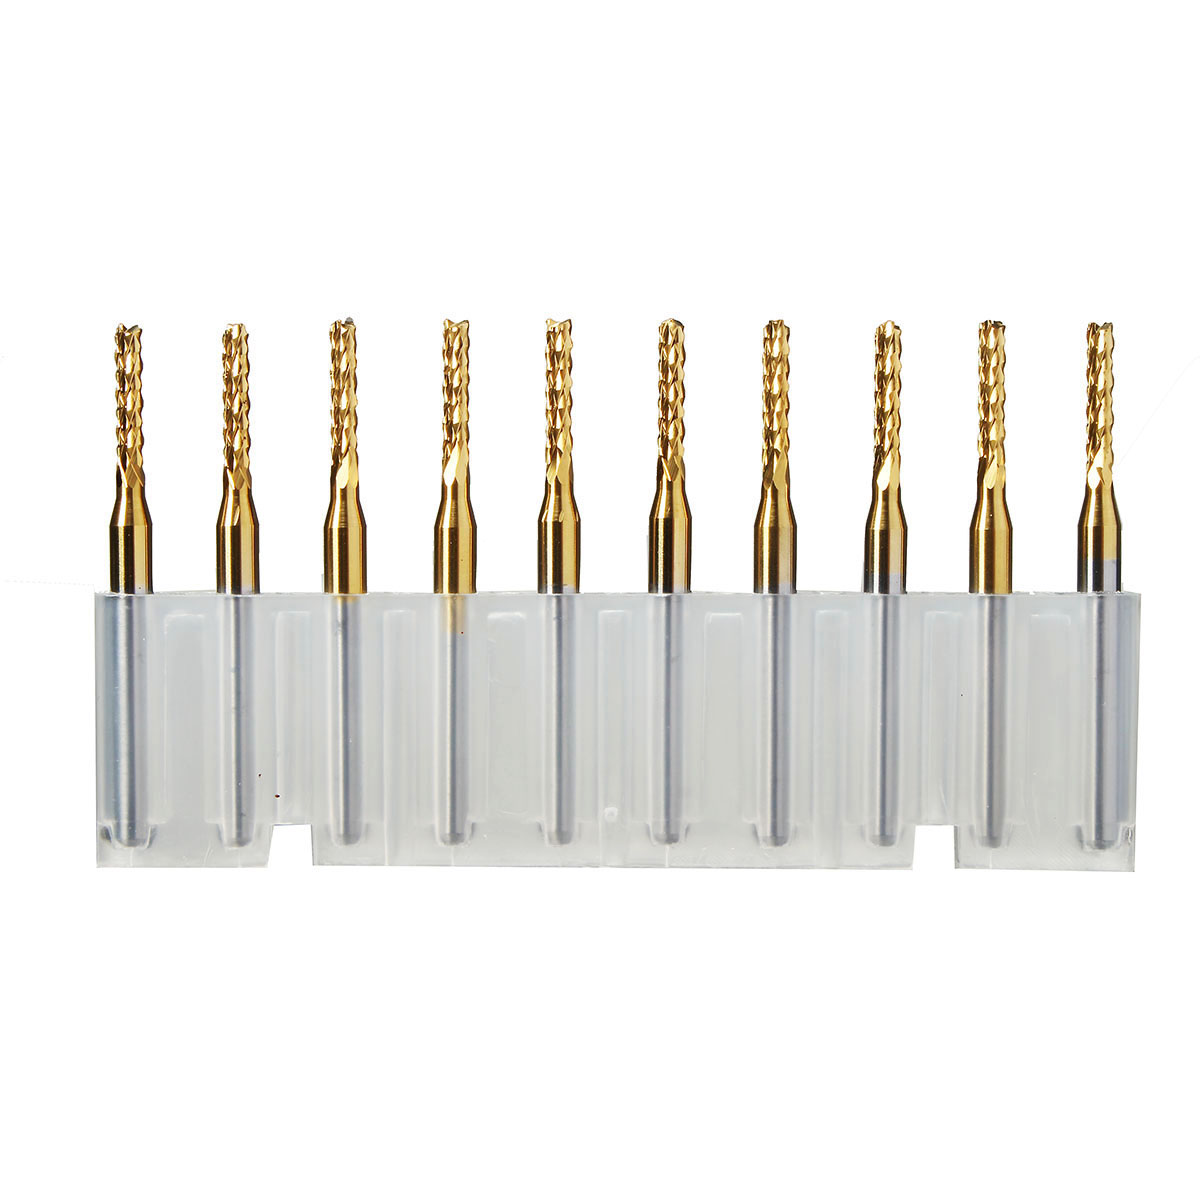 

Drillpro 10pcs 2.4mm Carbide End Mill Cutter Titanium Coated Engraving Milling Cutter